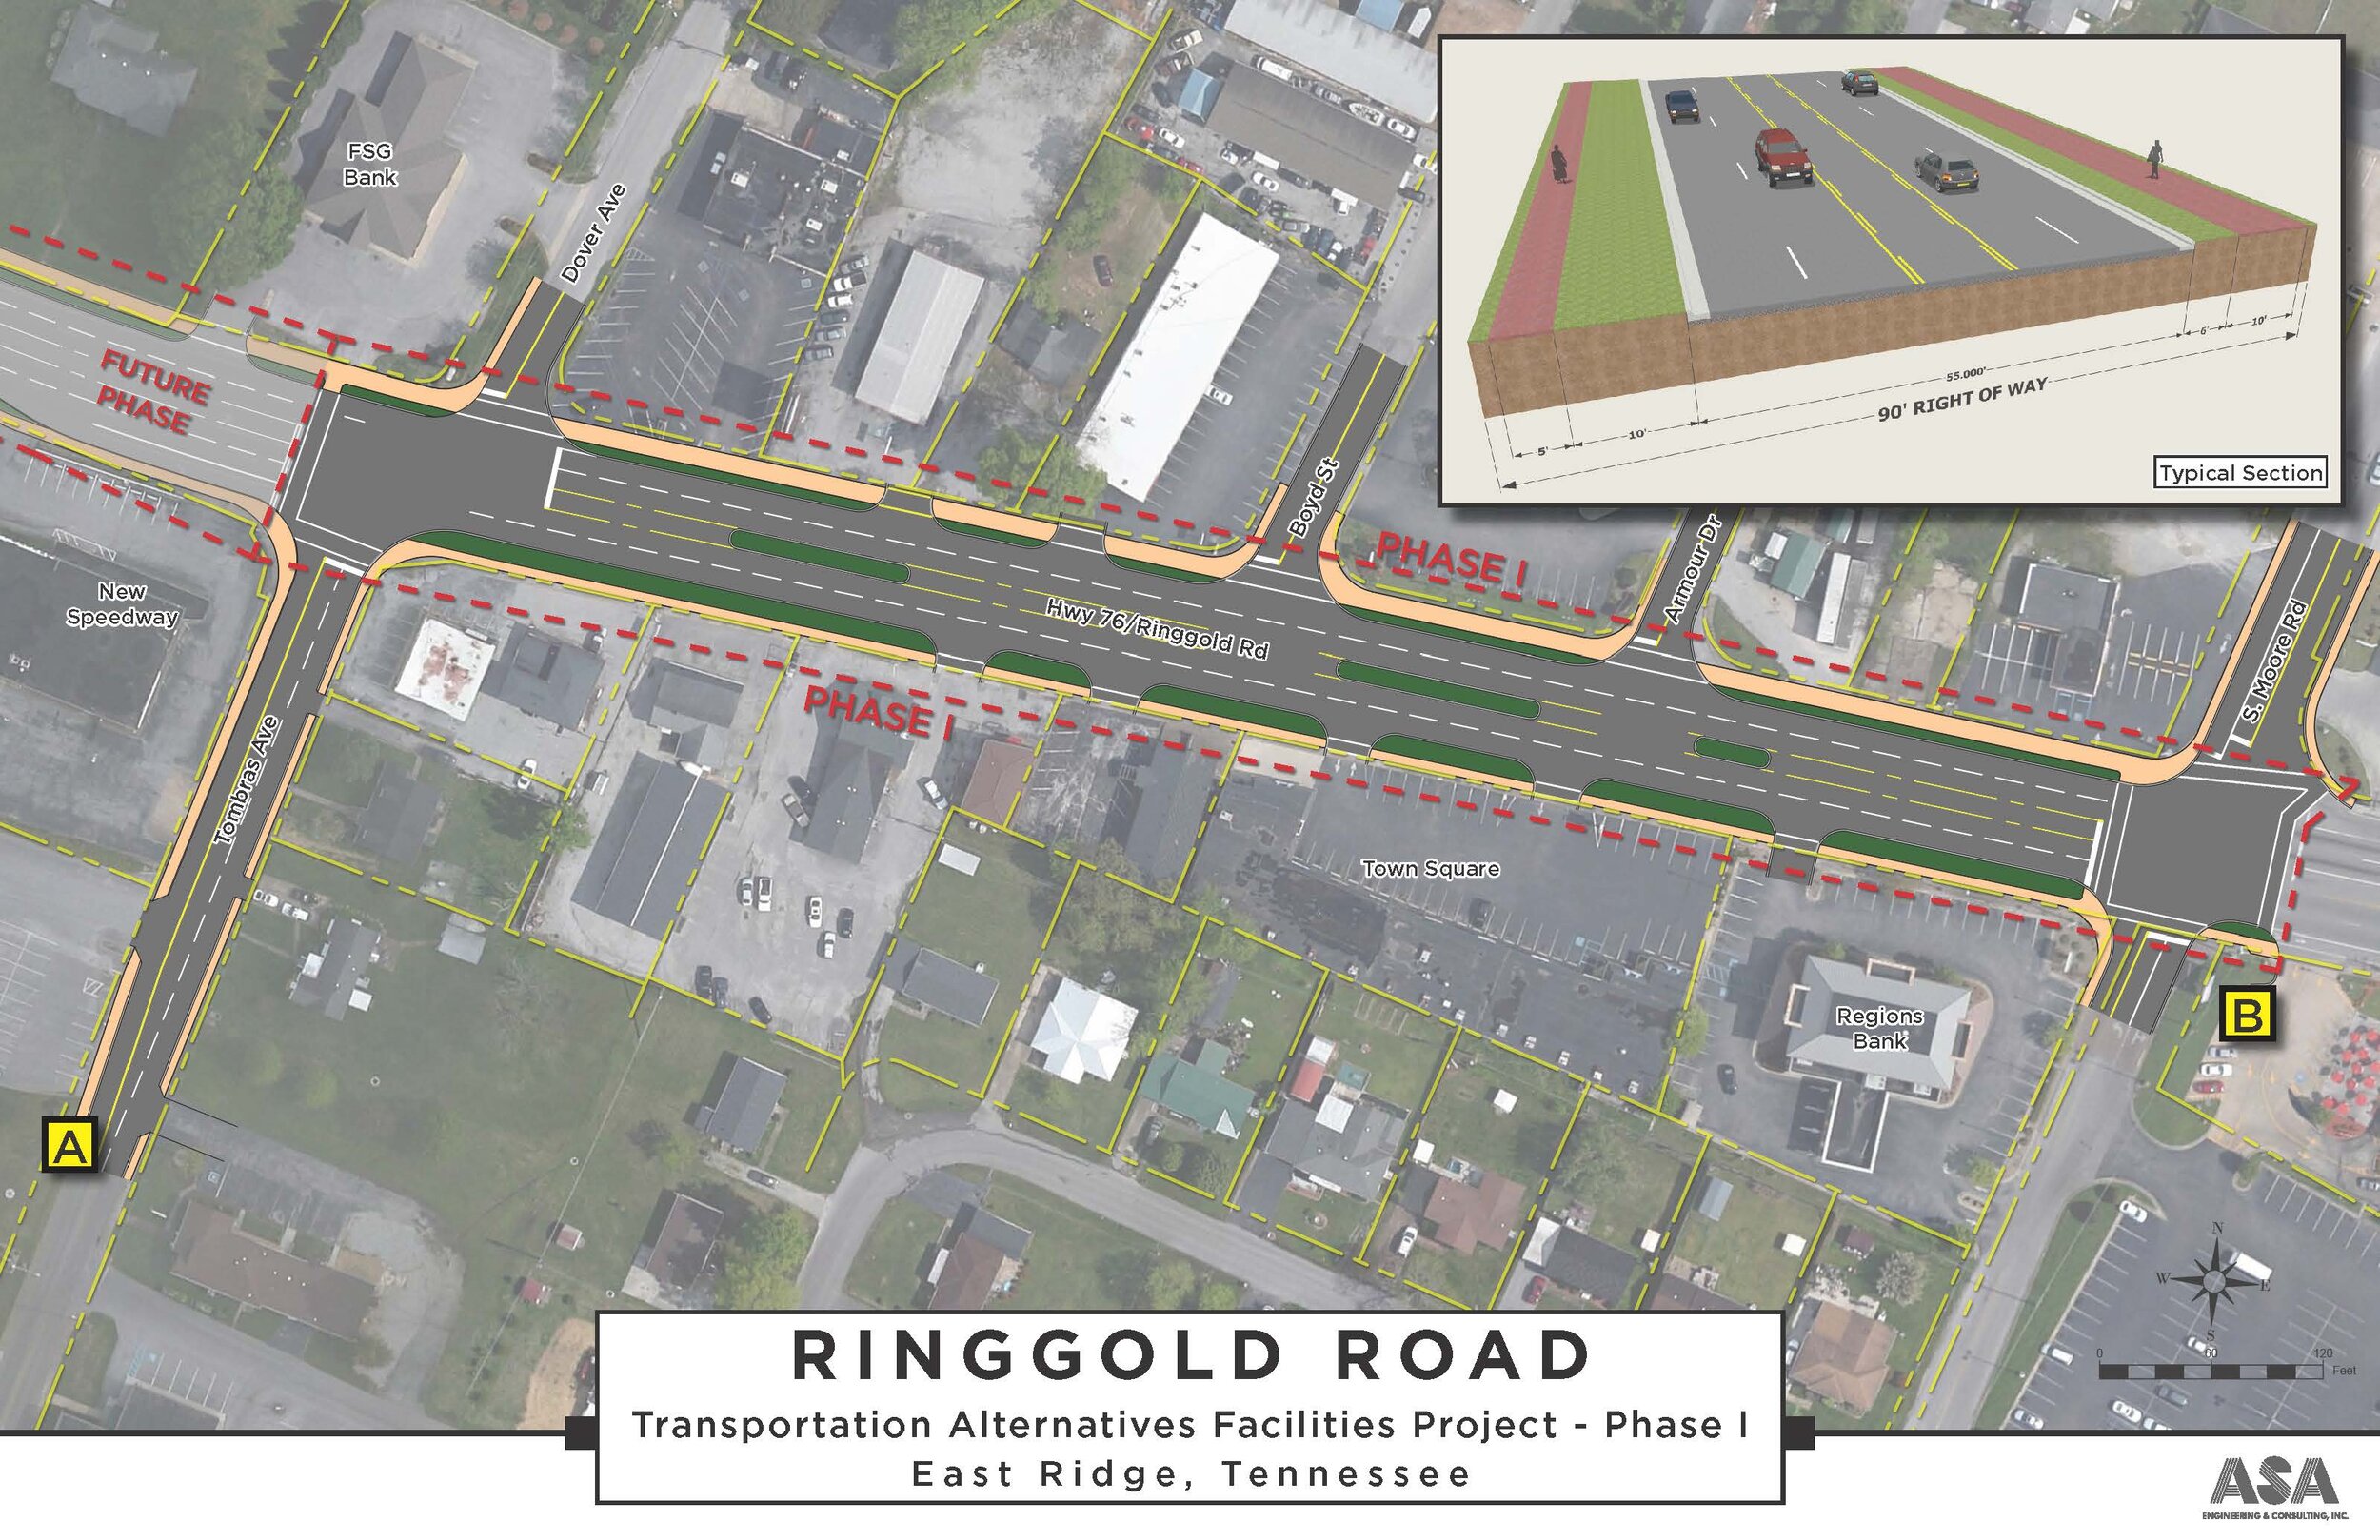 2014-11-03_Ringgold Road Phase 1 Concept.jpg